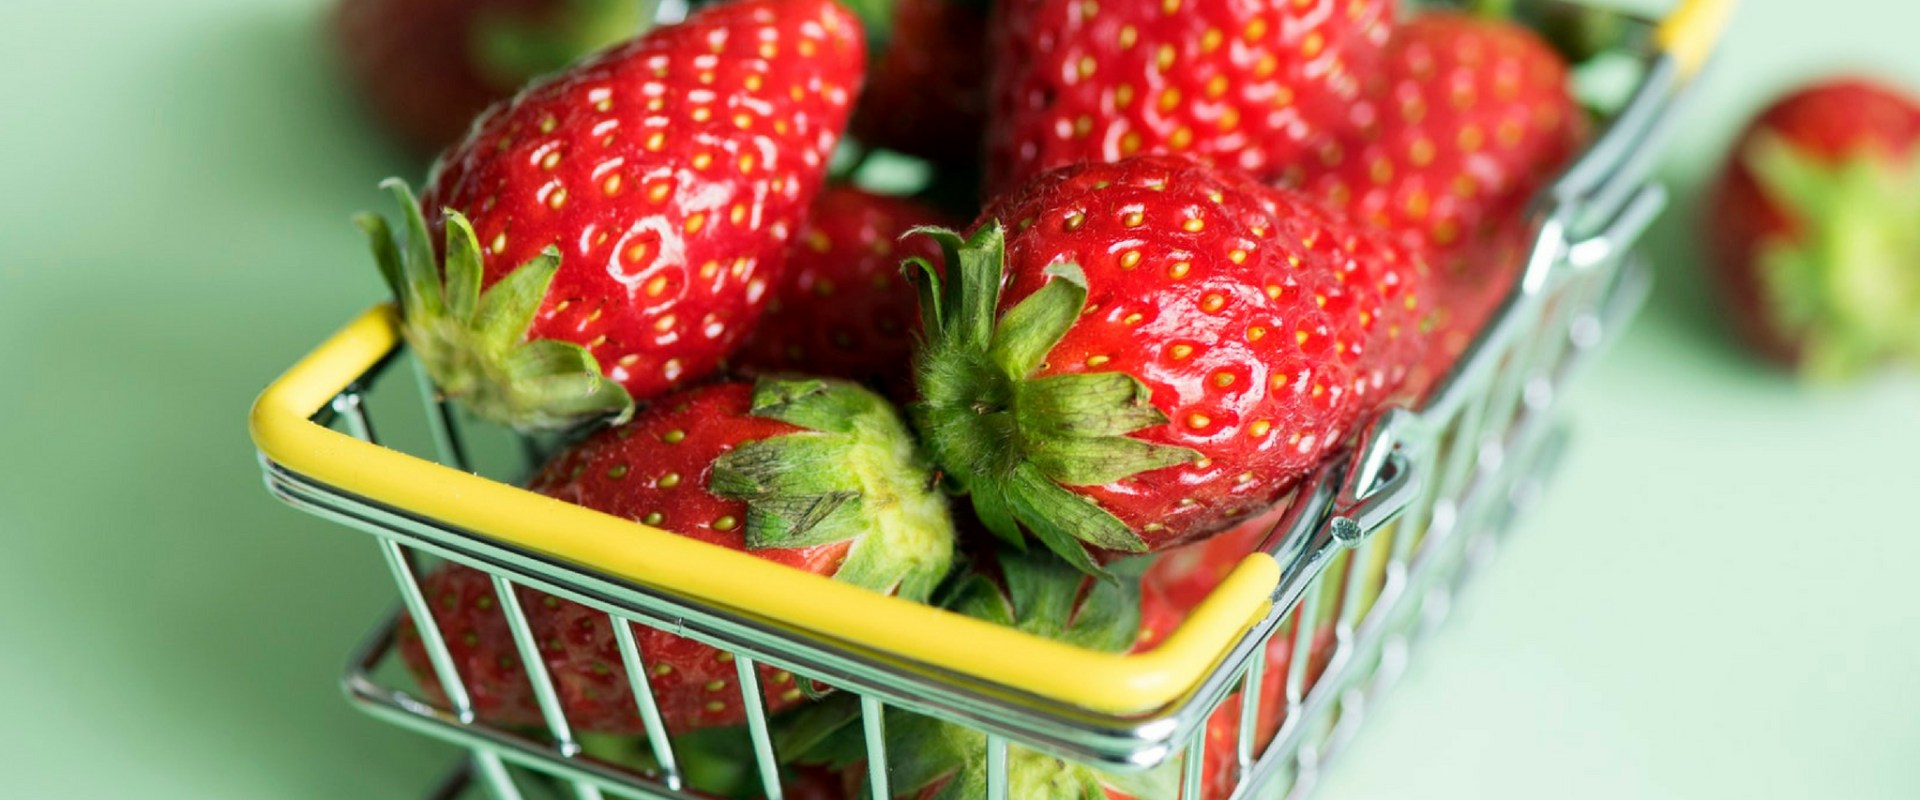 How to Shop Smartly and Sustainably at Grocery Stores